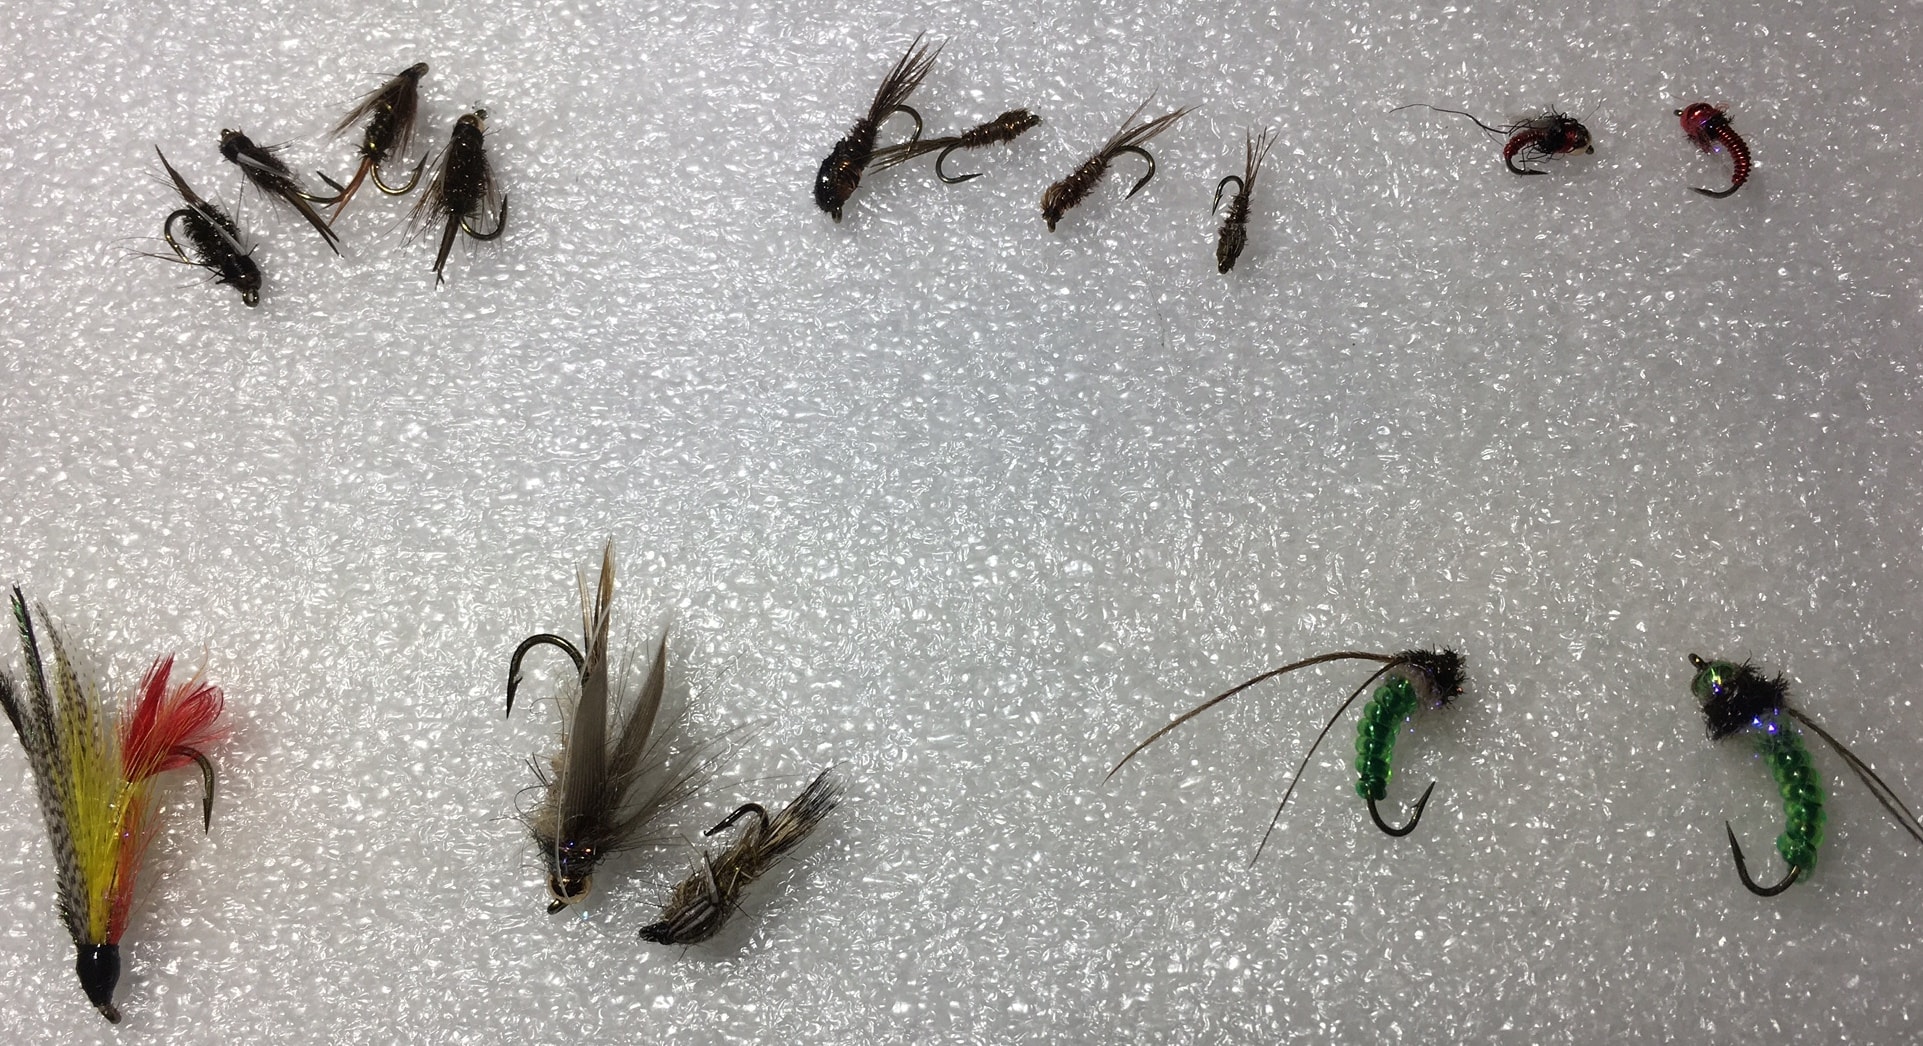 Catching Shadows - Winter Small Fly Tying And Fishing Tips